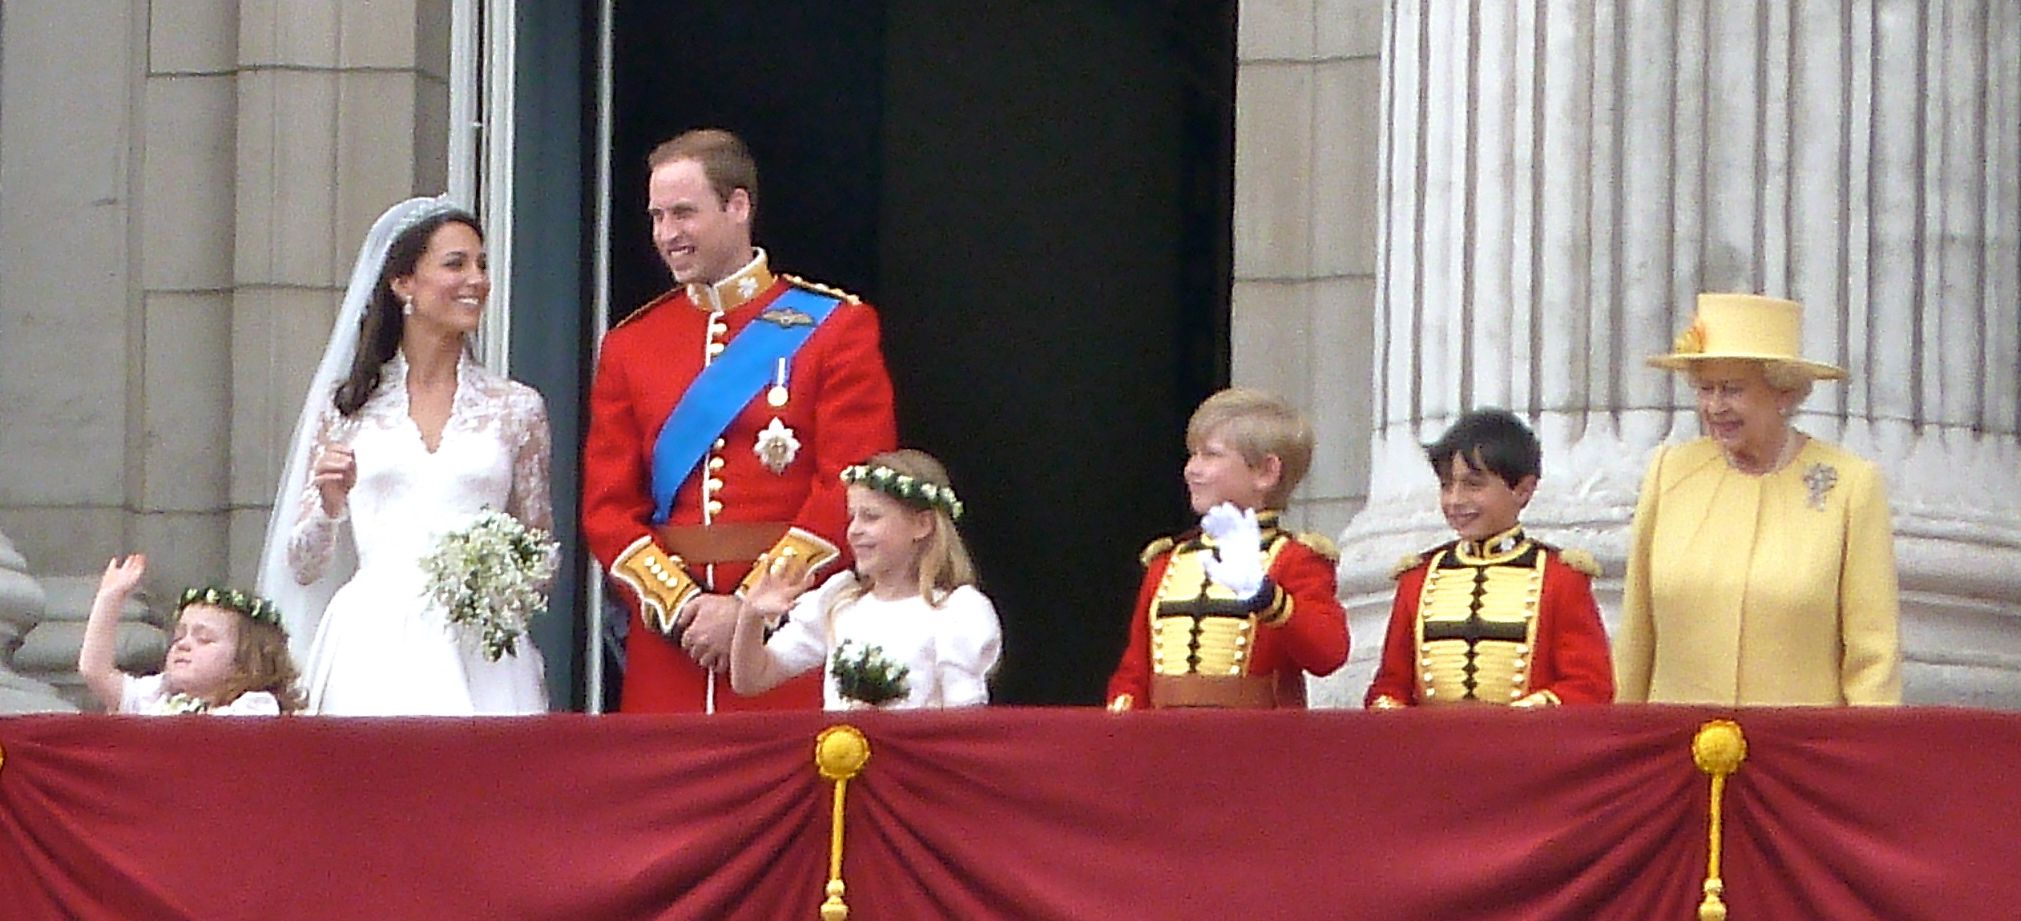 William and Kate Royal Wedding